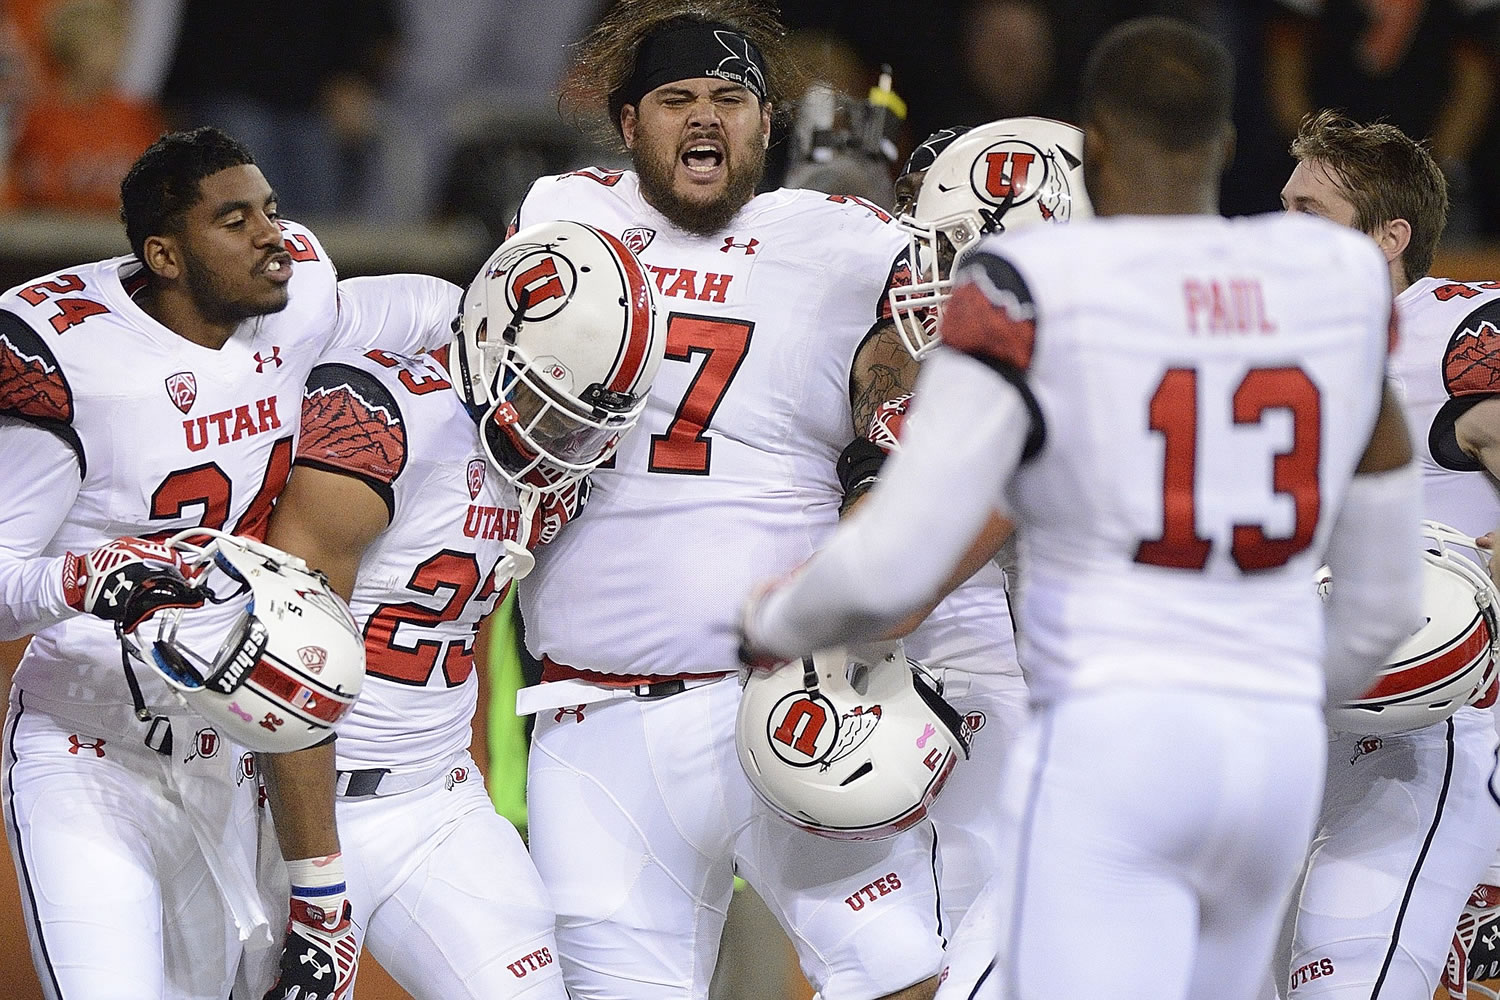 University of Utah running back Devontae Booker (23) celebrates with teammates after scoring a game winning touchdown in overtime against Oregon State on Thursday.